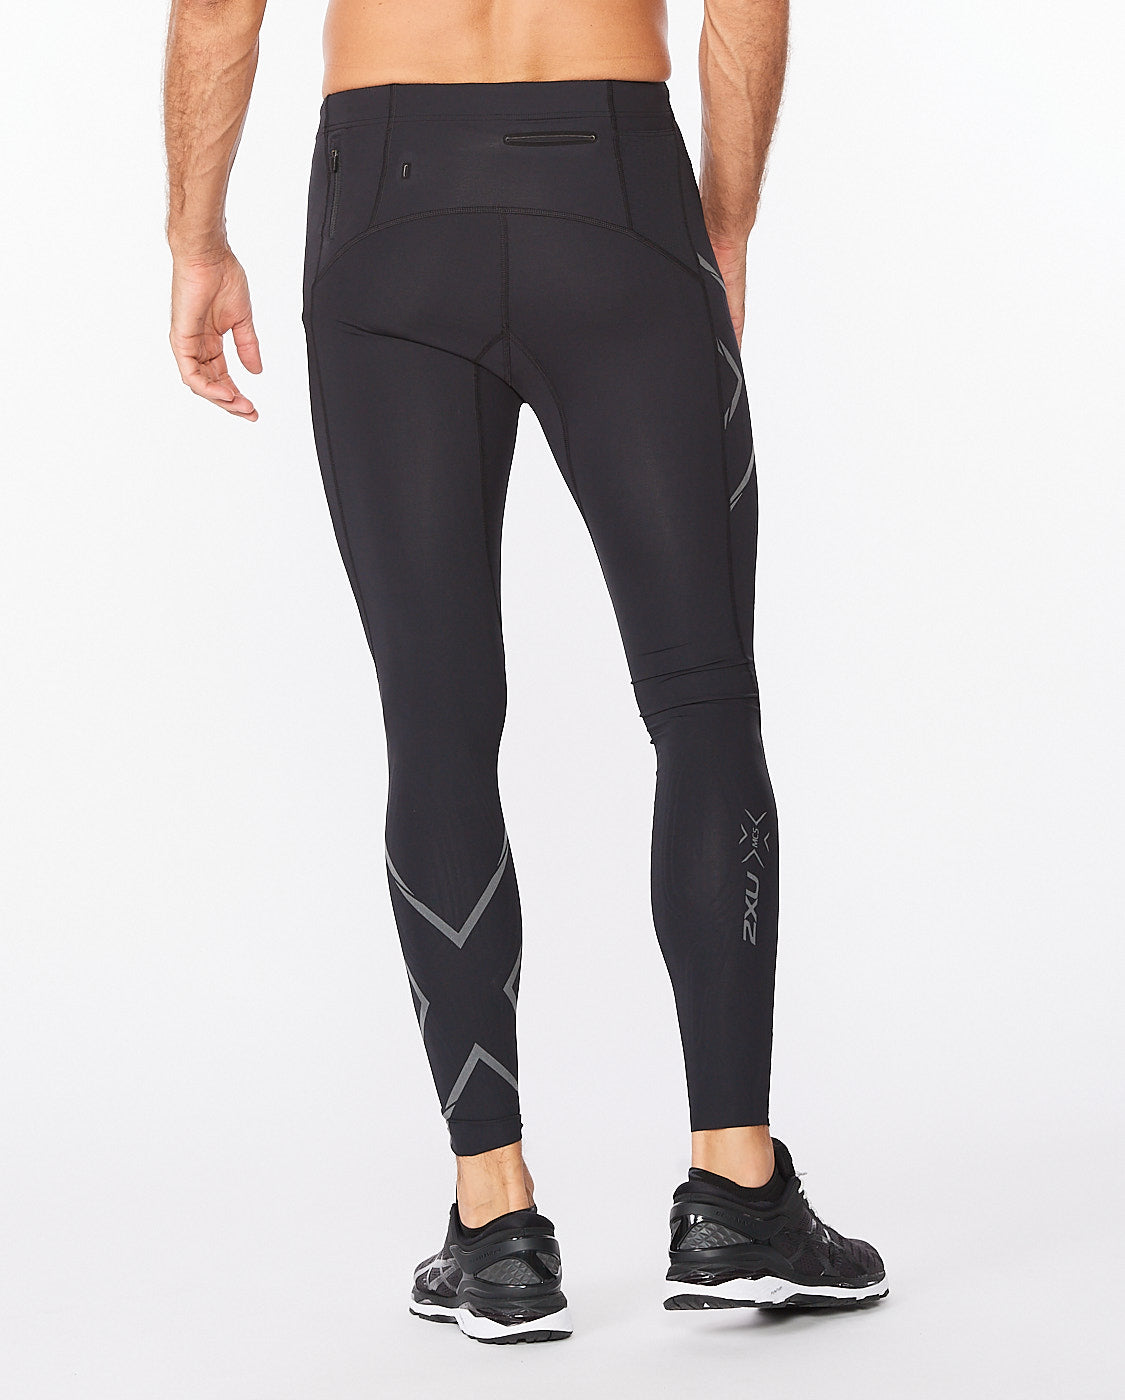 Under Armour Speedpocket Compression Tights Black/Black 1361489-001 - Free  Shipping at LASC